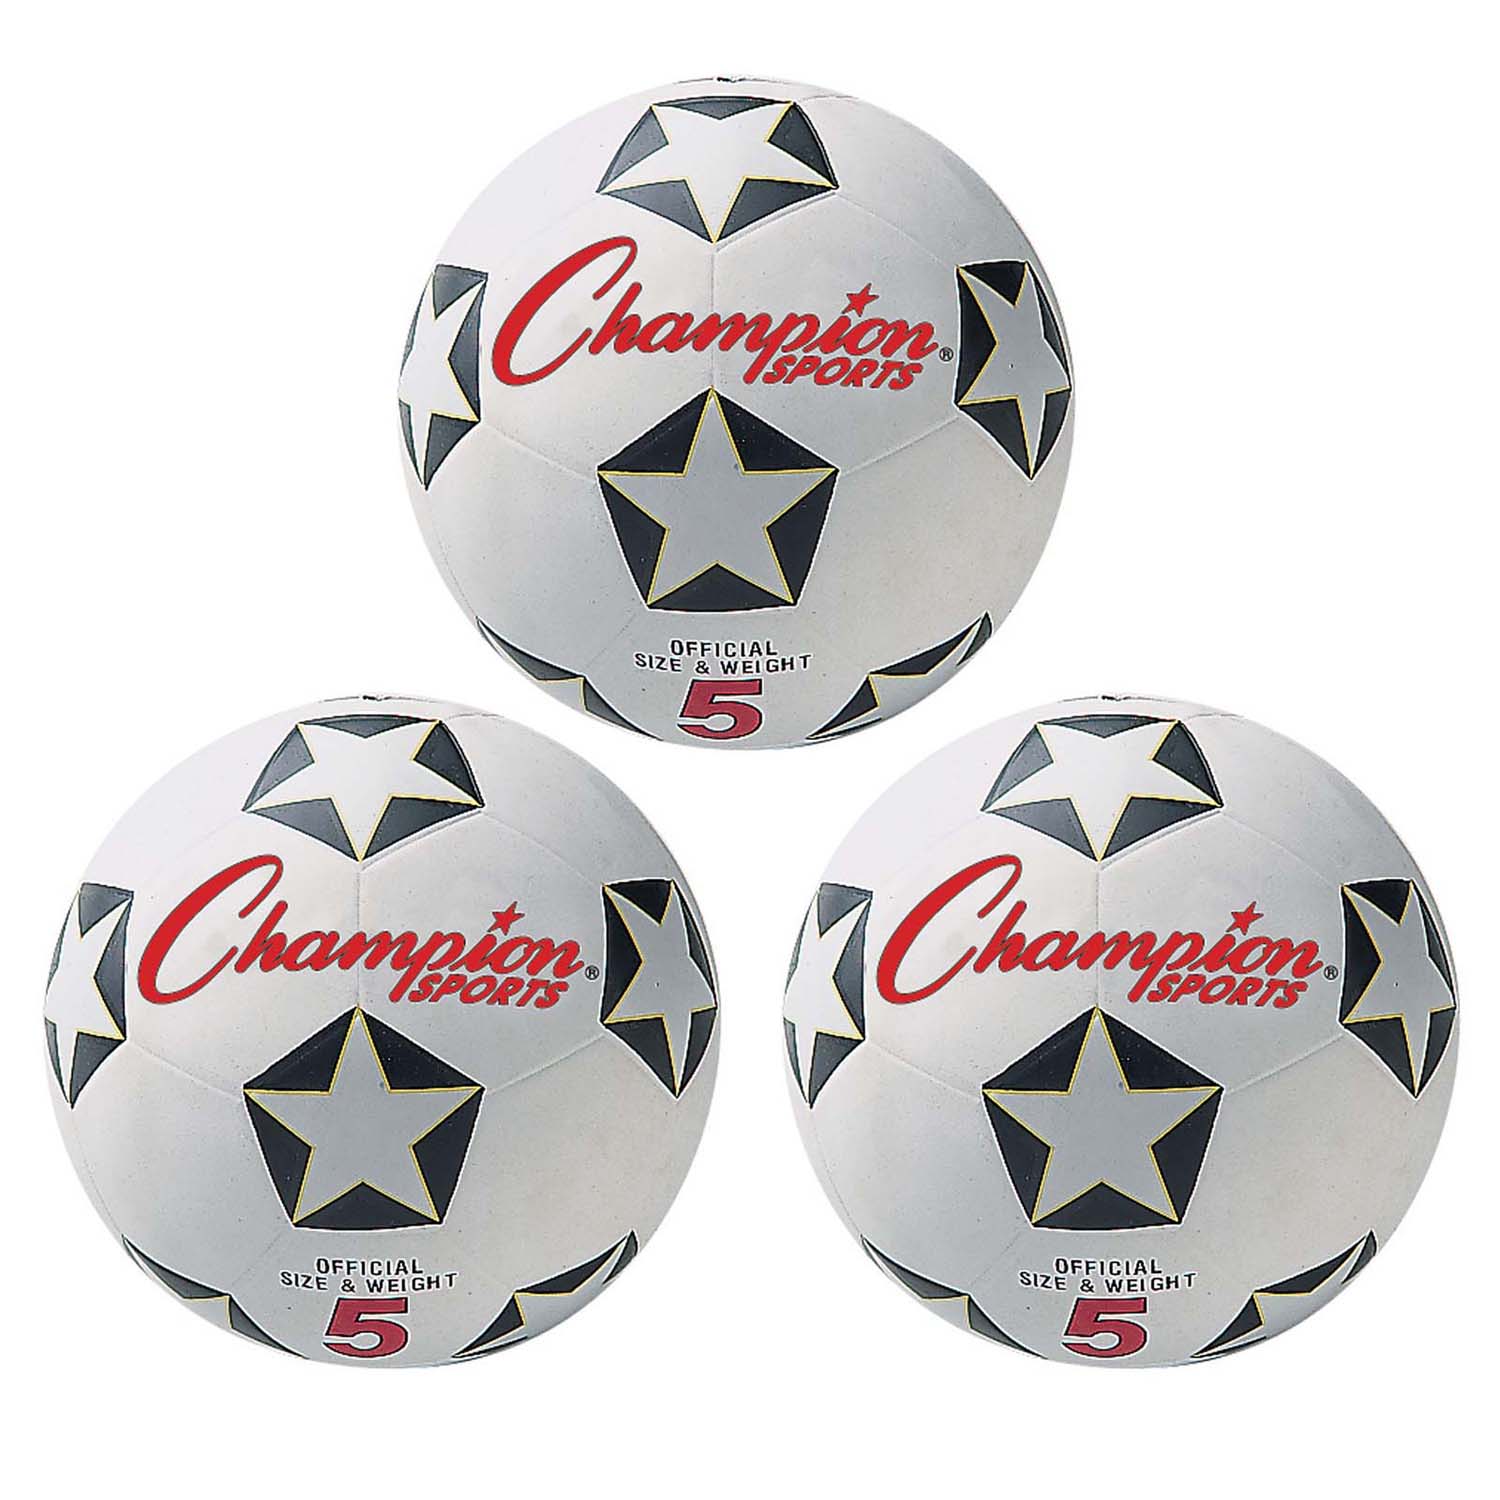 Rubber Soccer Ball Size 5, Pack of 3